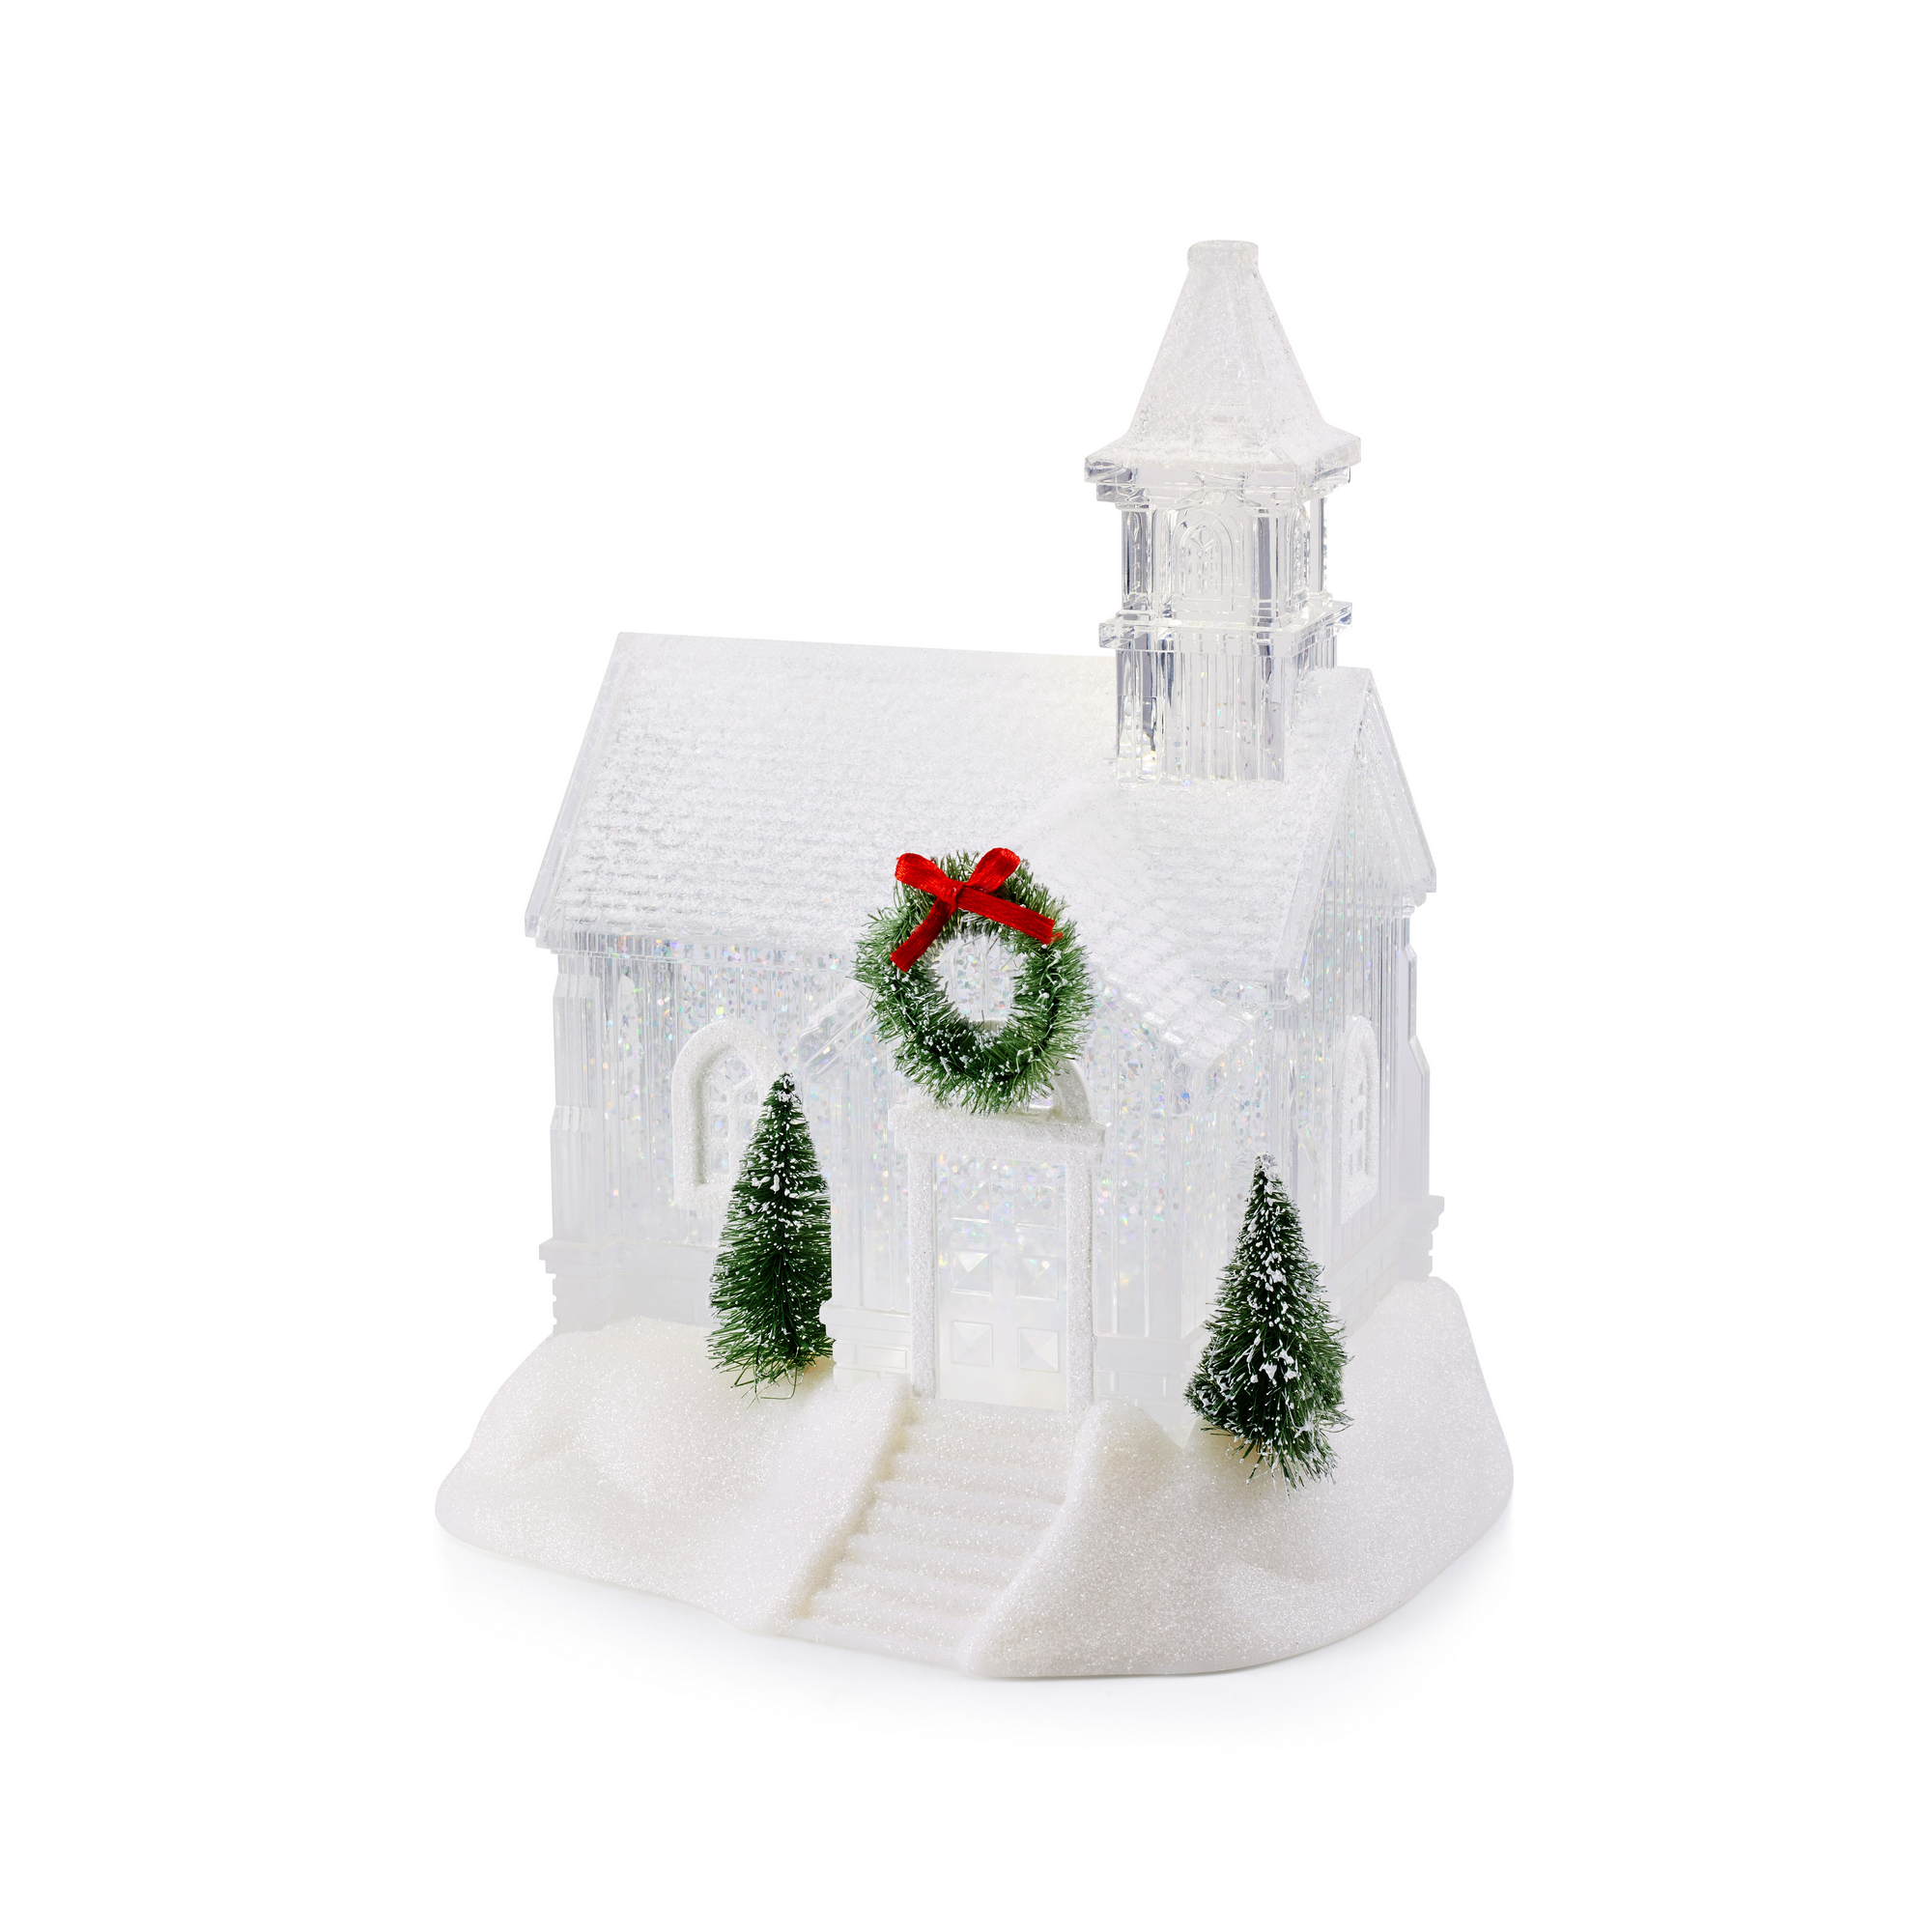 LED-Weihnachtsbeleuchtung 'Chapelle' Acryl 3 LEDs warmweiß 17 x 23 x 14 cm + product picture